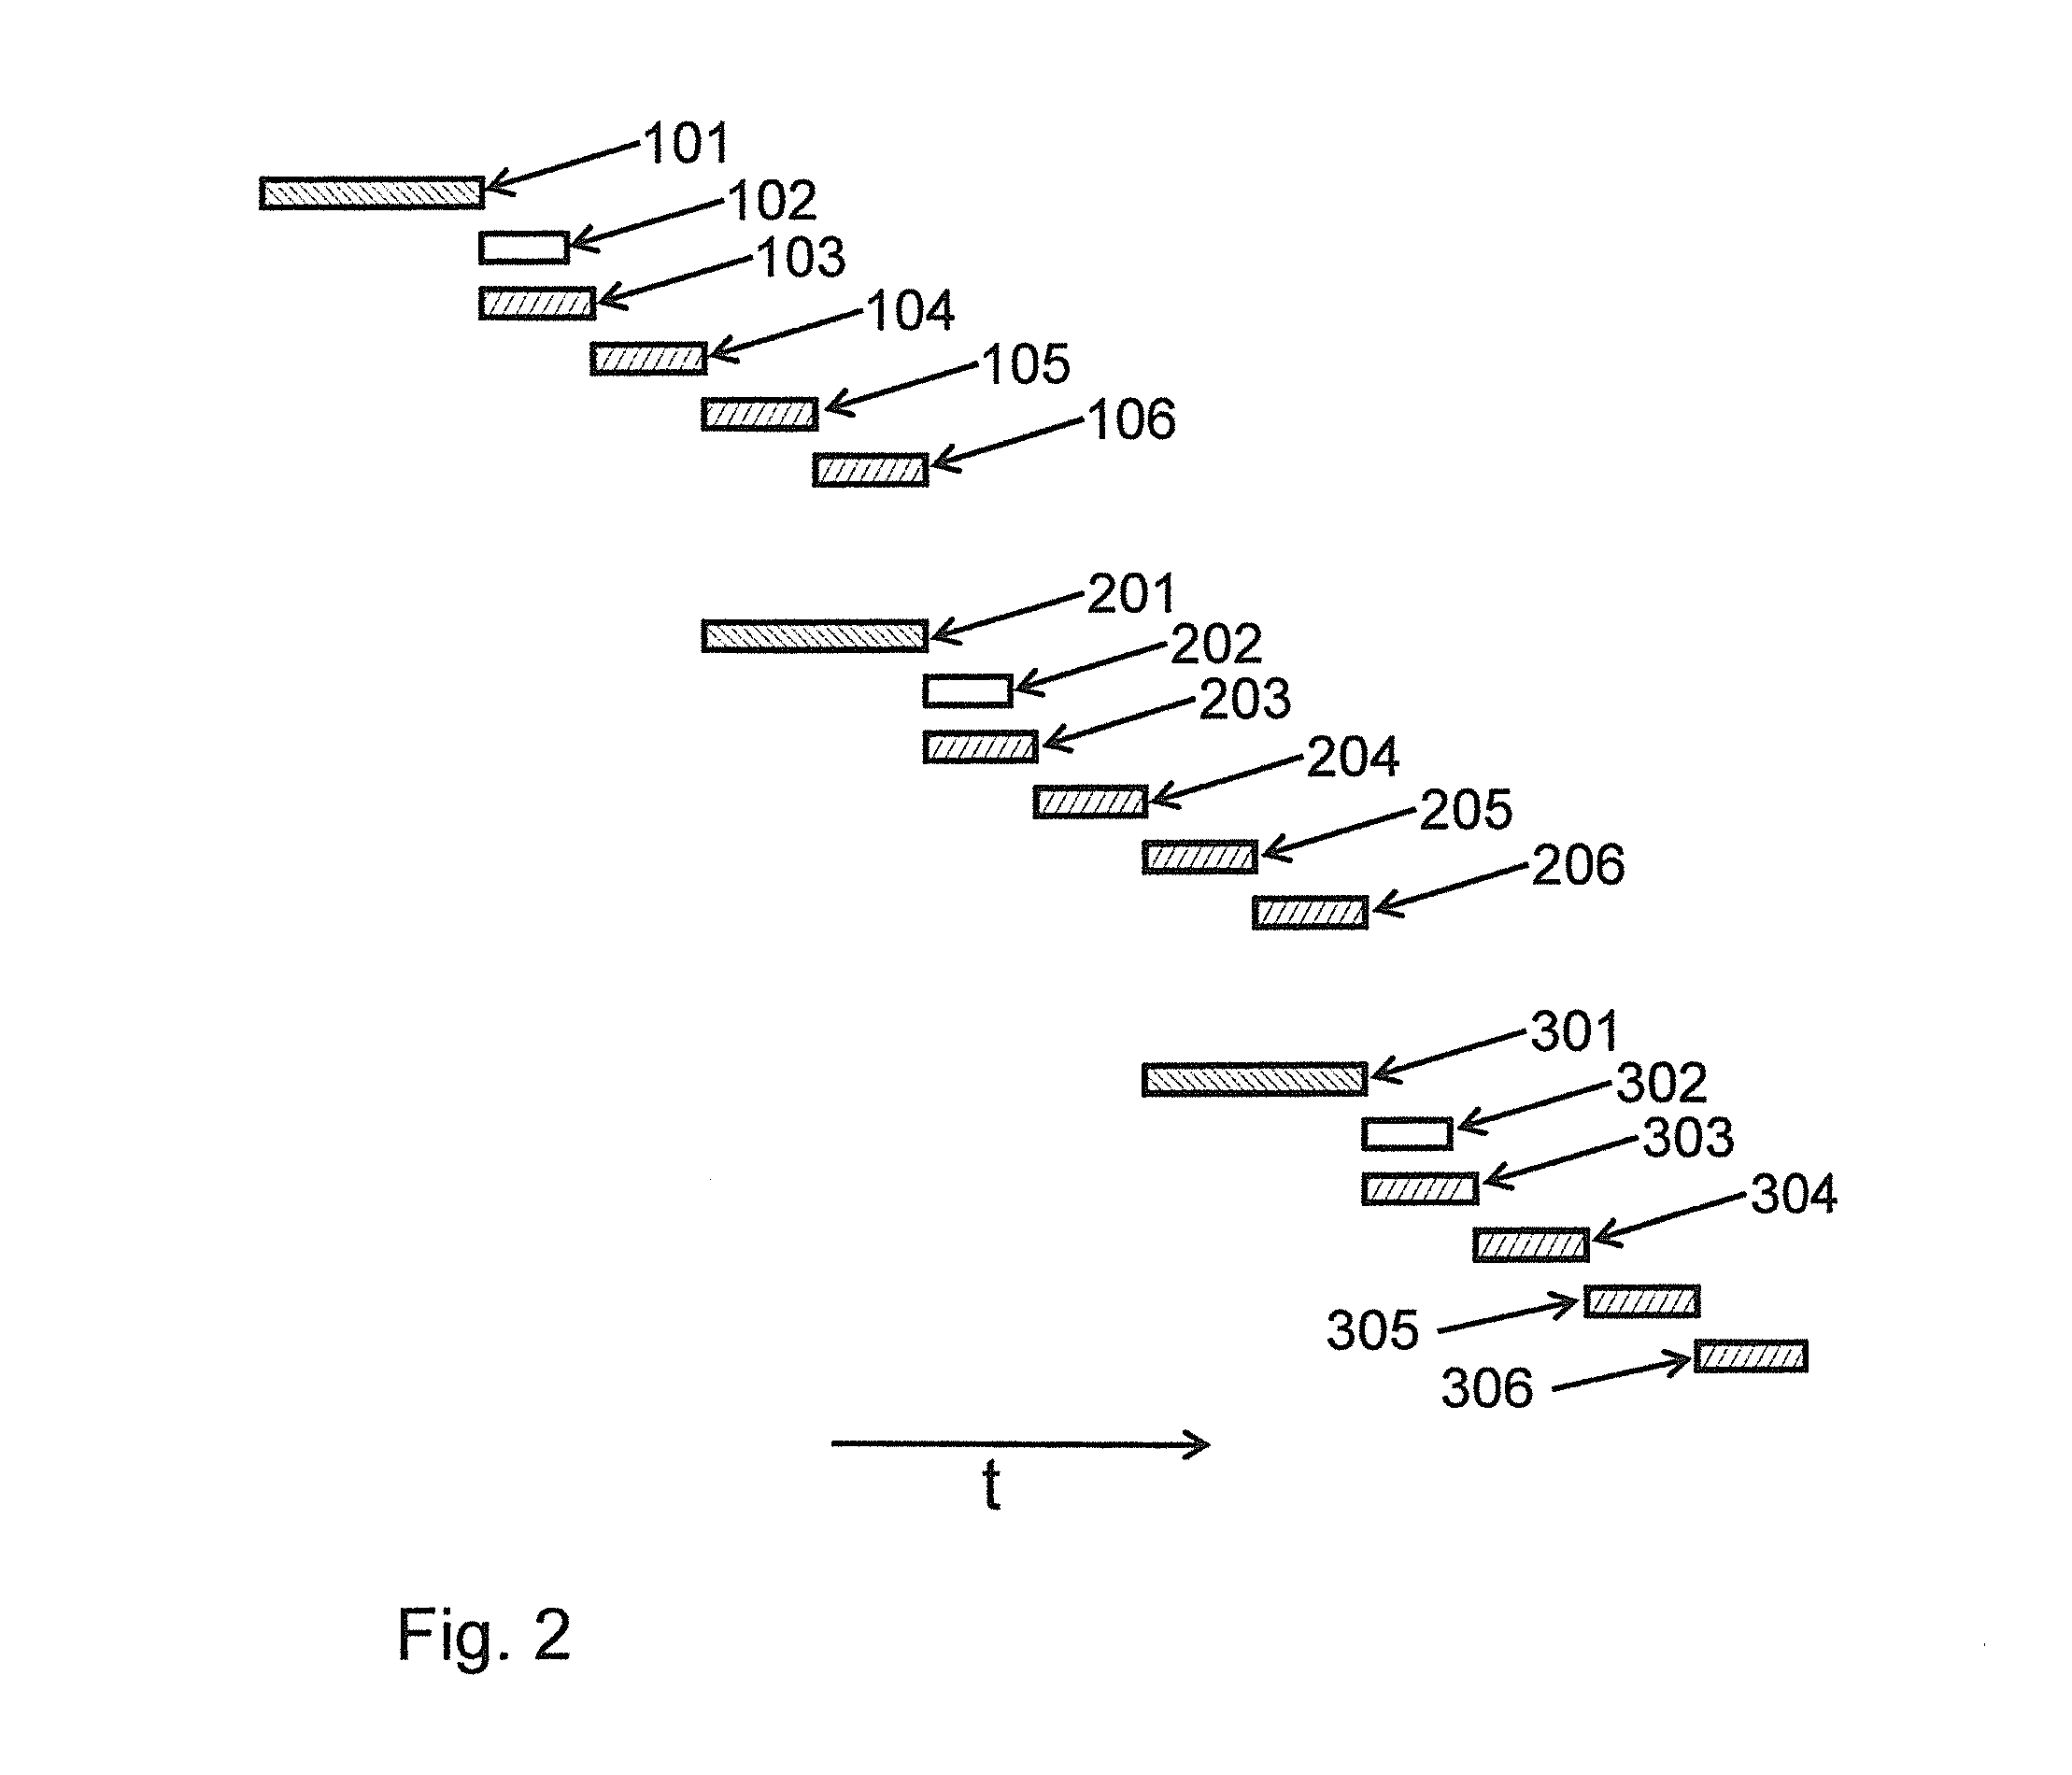 Motion picture camera arrangement and method of operating a motion picture camera arrangement